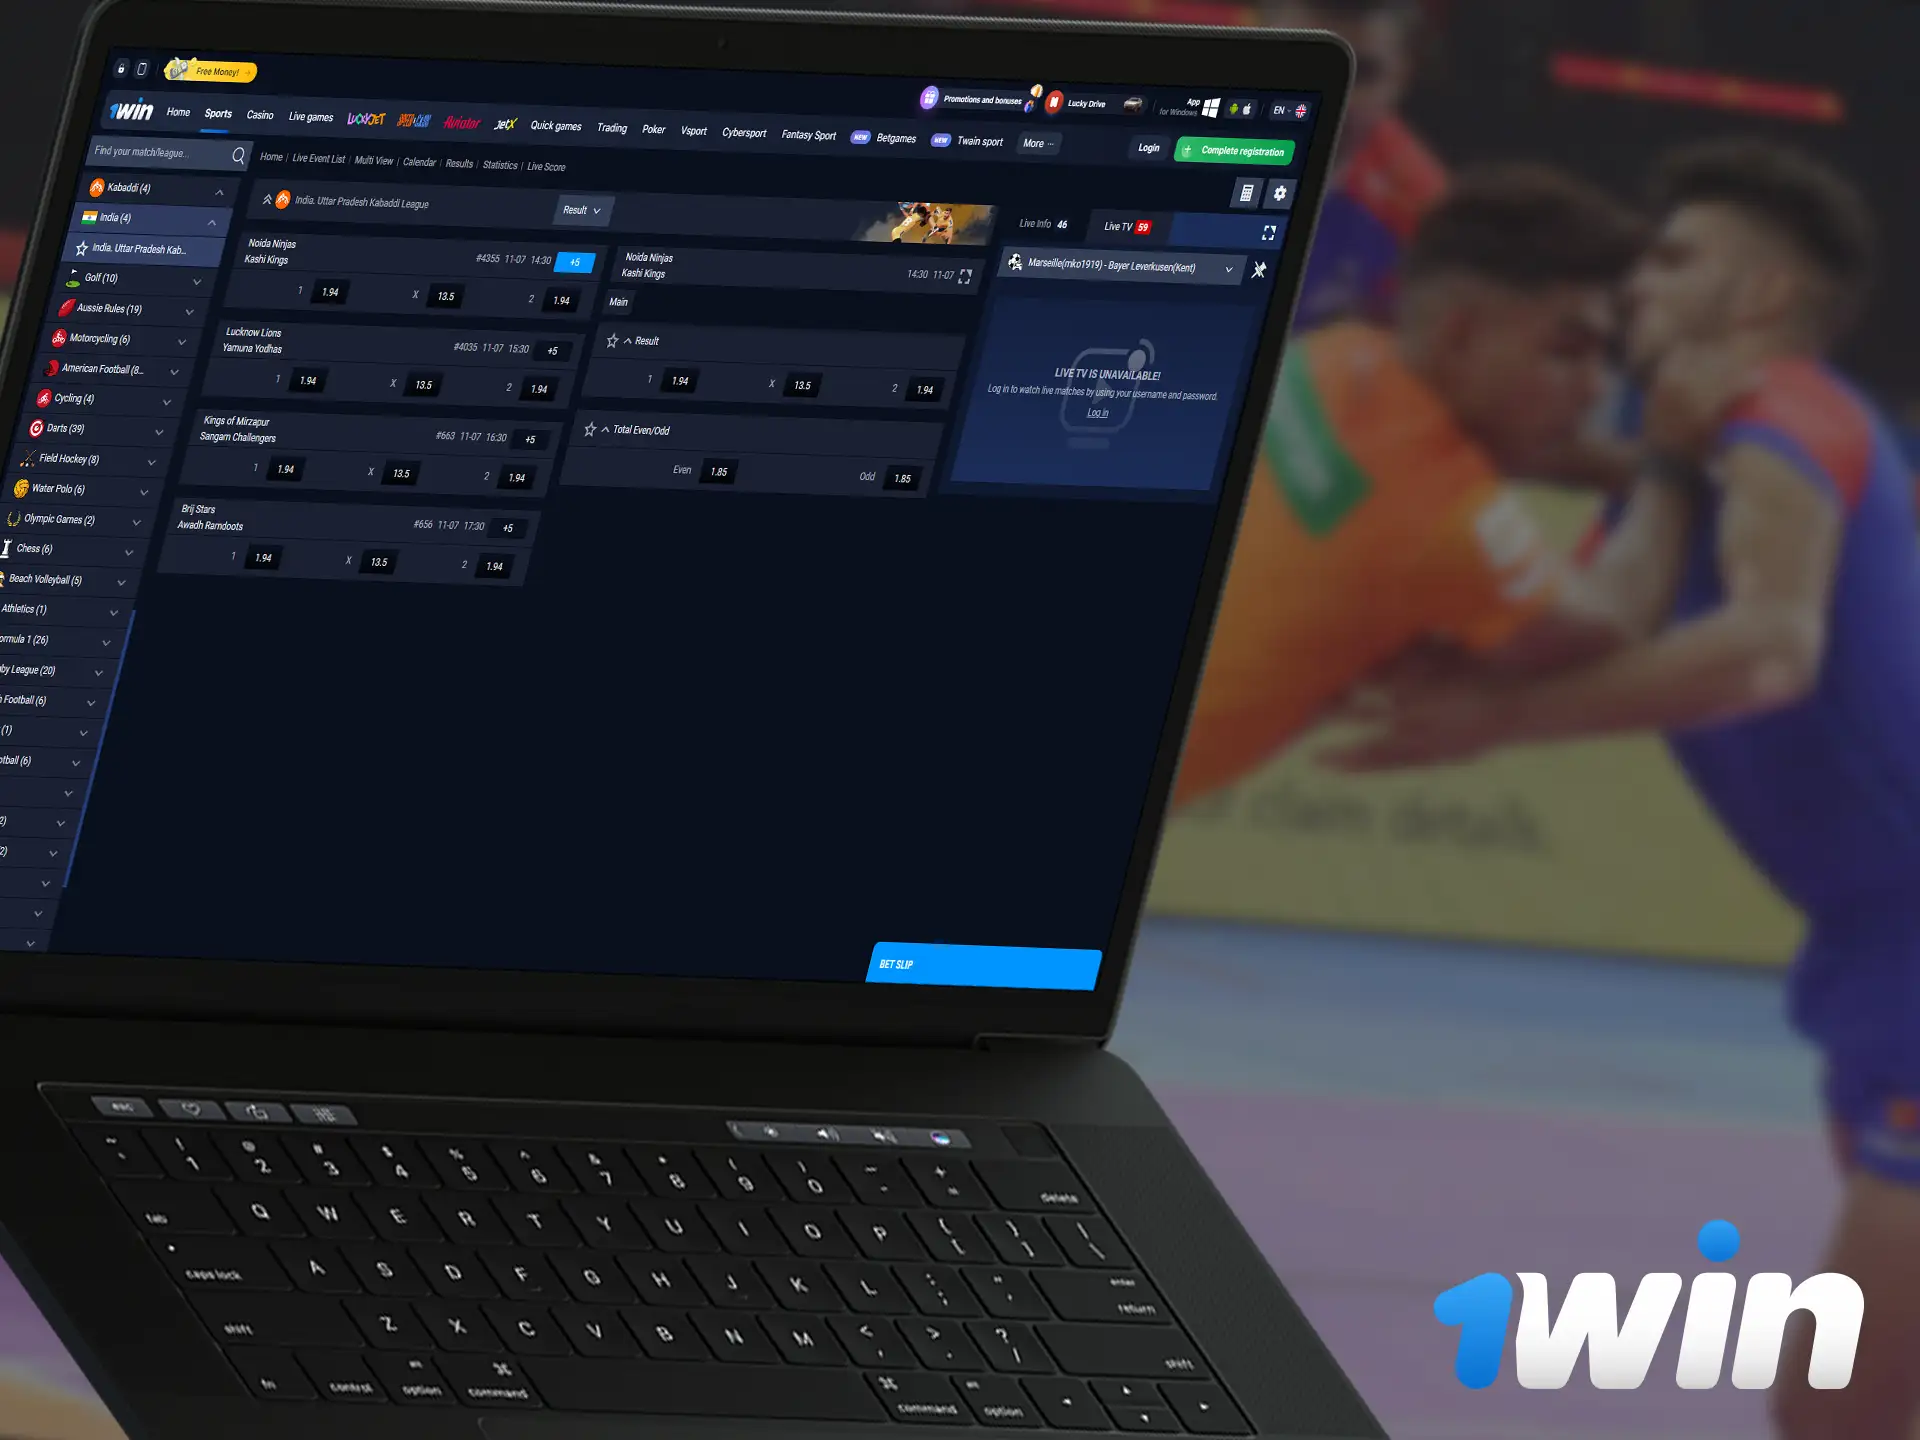 1Win gives you the opportunity to bet on major tournaments such as the Pro Kabaddi League.